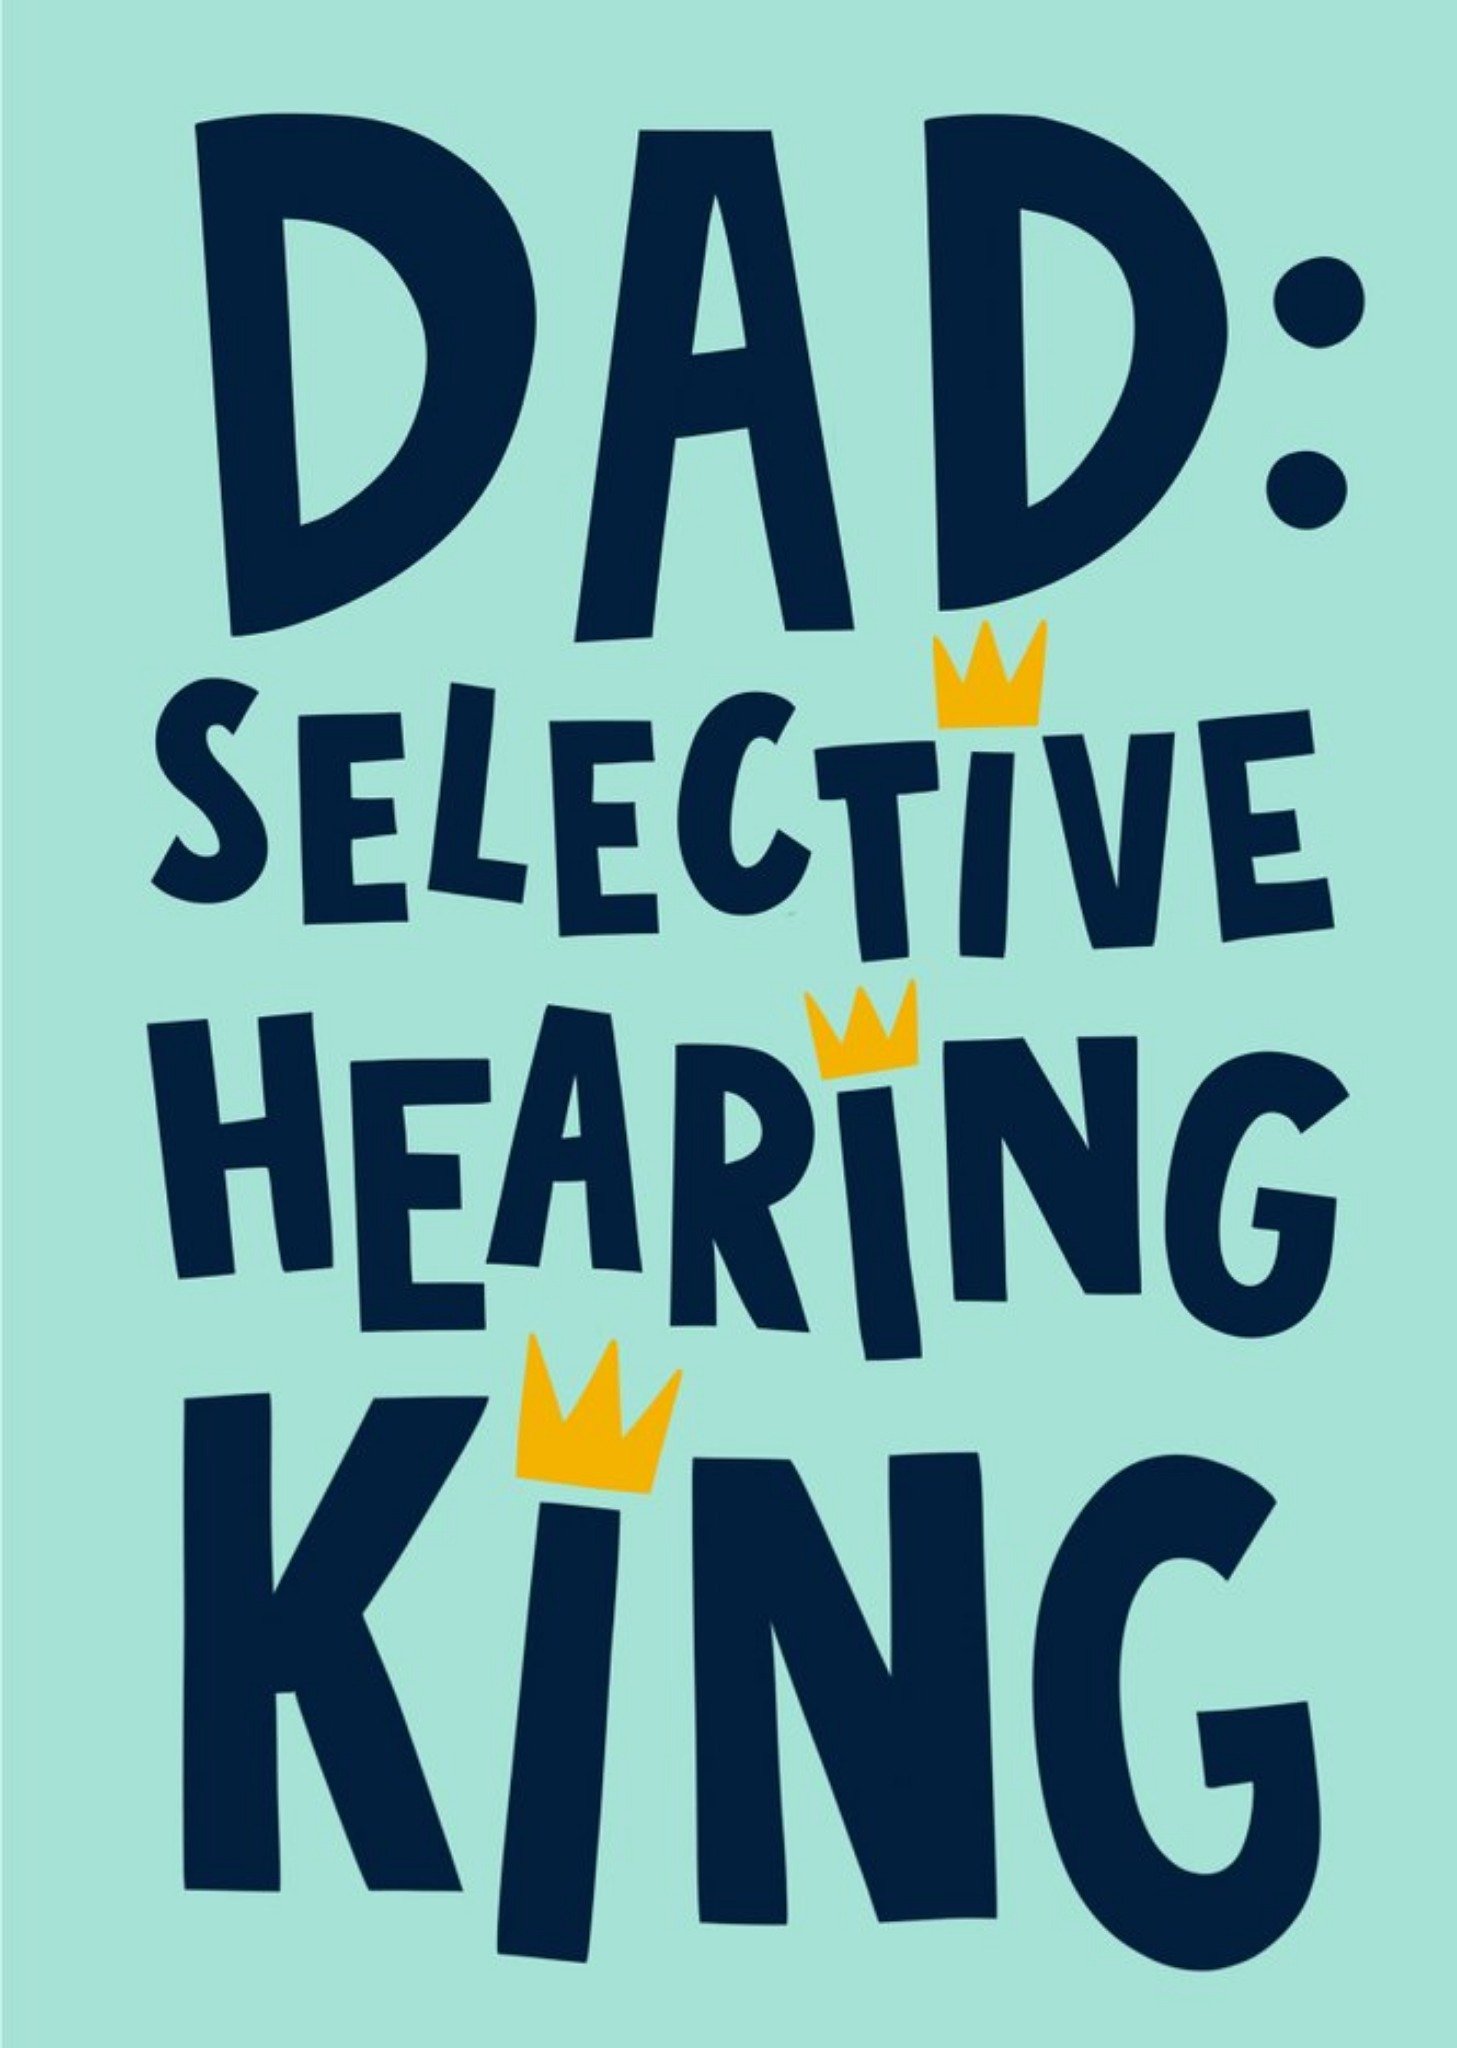 Moonpig Selective Hearing King Father's Day Card Ecard